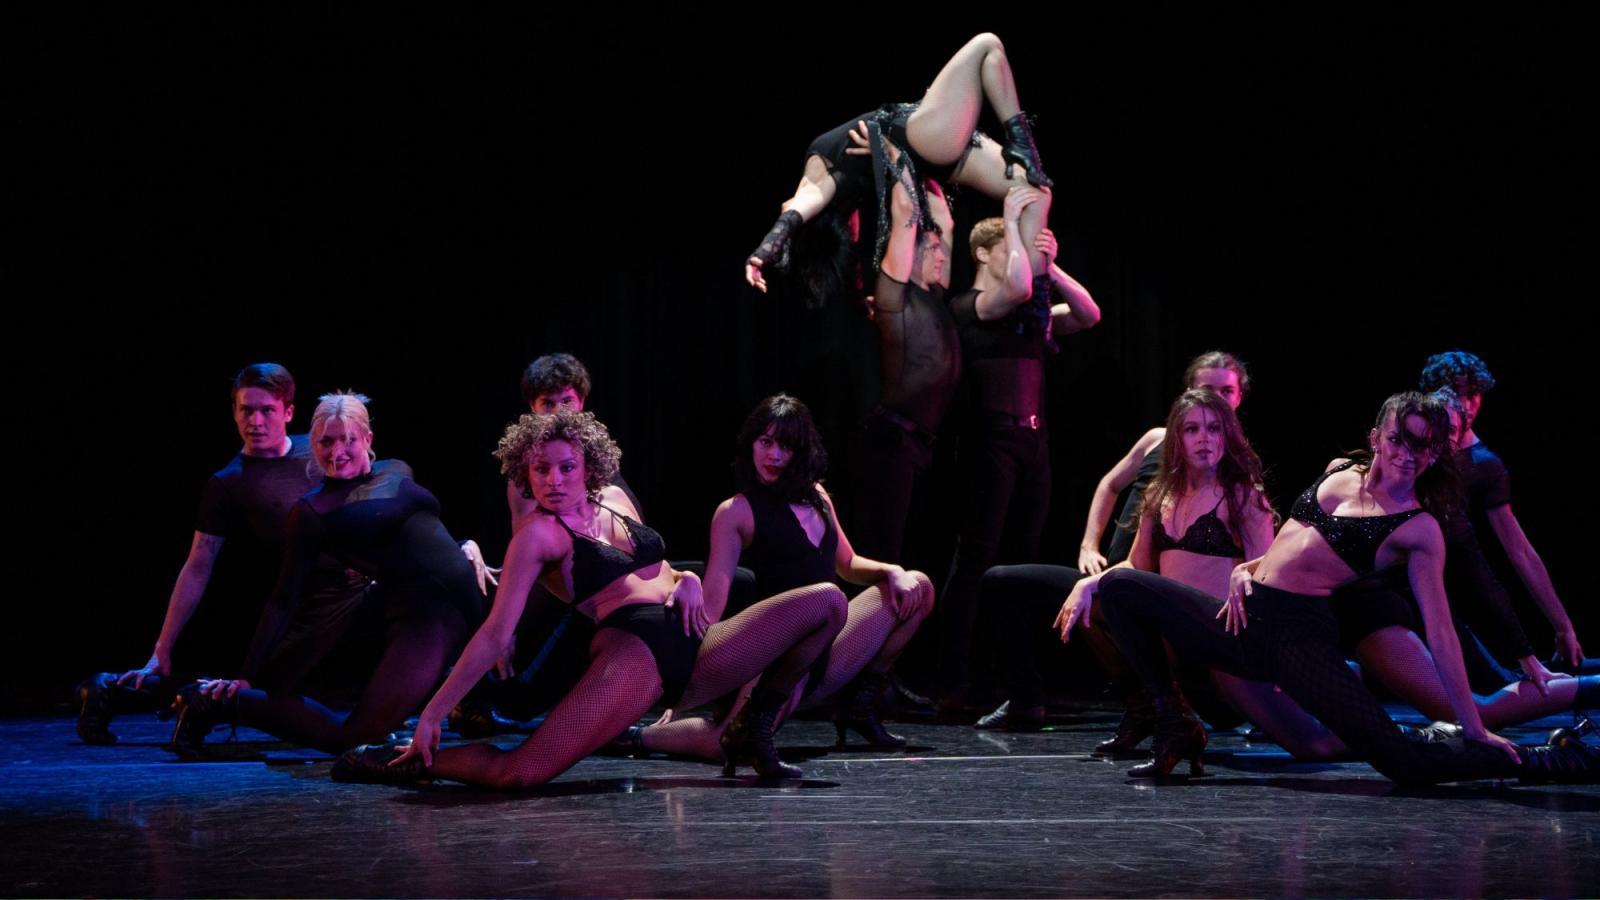 Dancers from the Sands College of Performing Arts performing on stage.